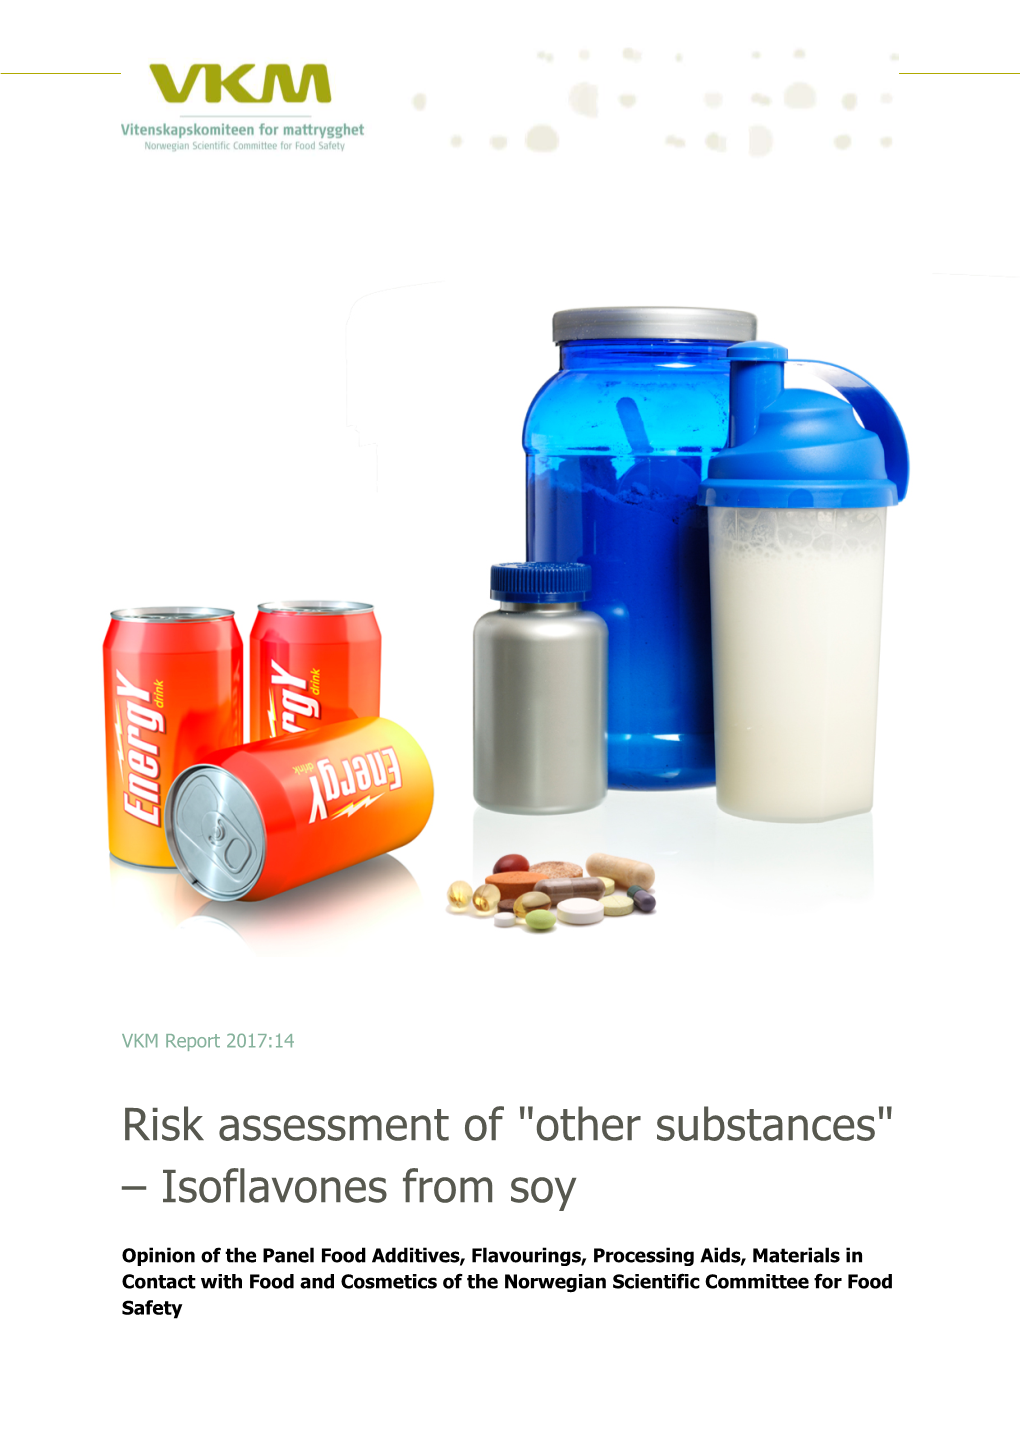 Risk Assessment of "Other Substances" – Isoflavones from Soy